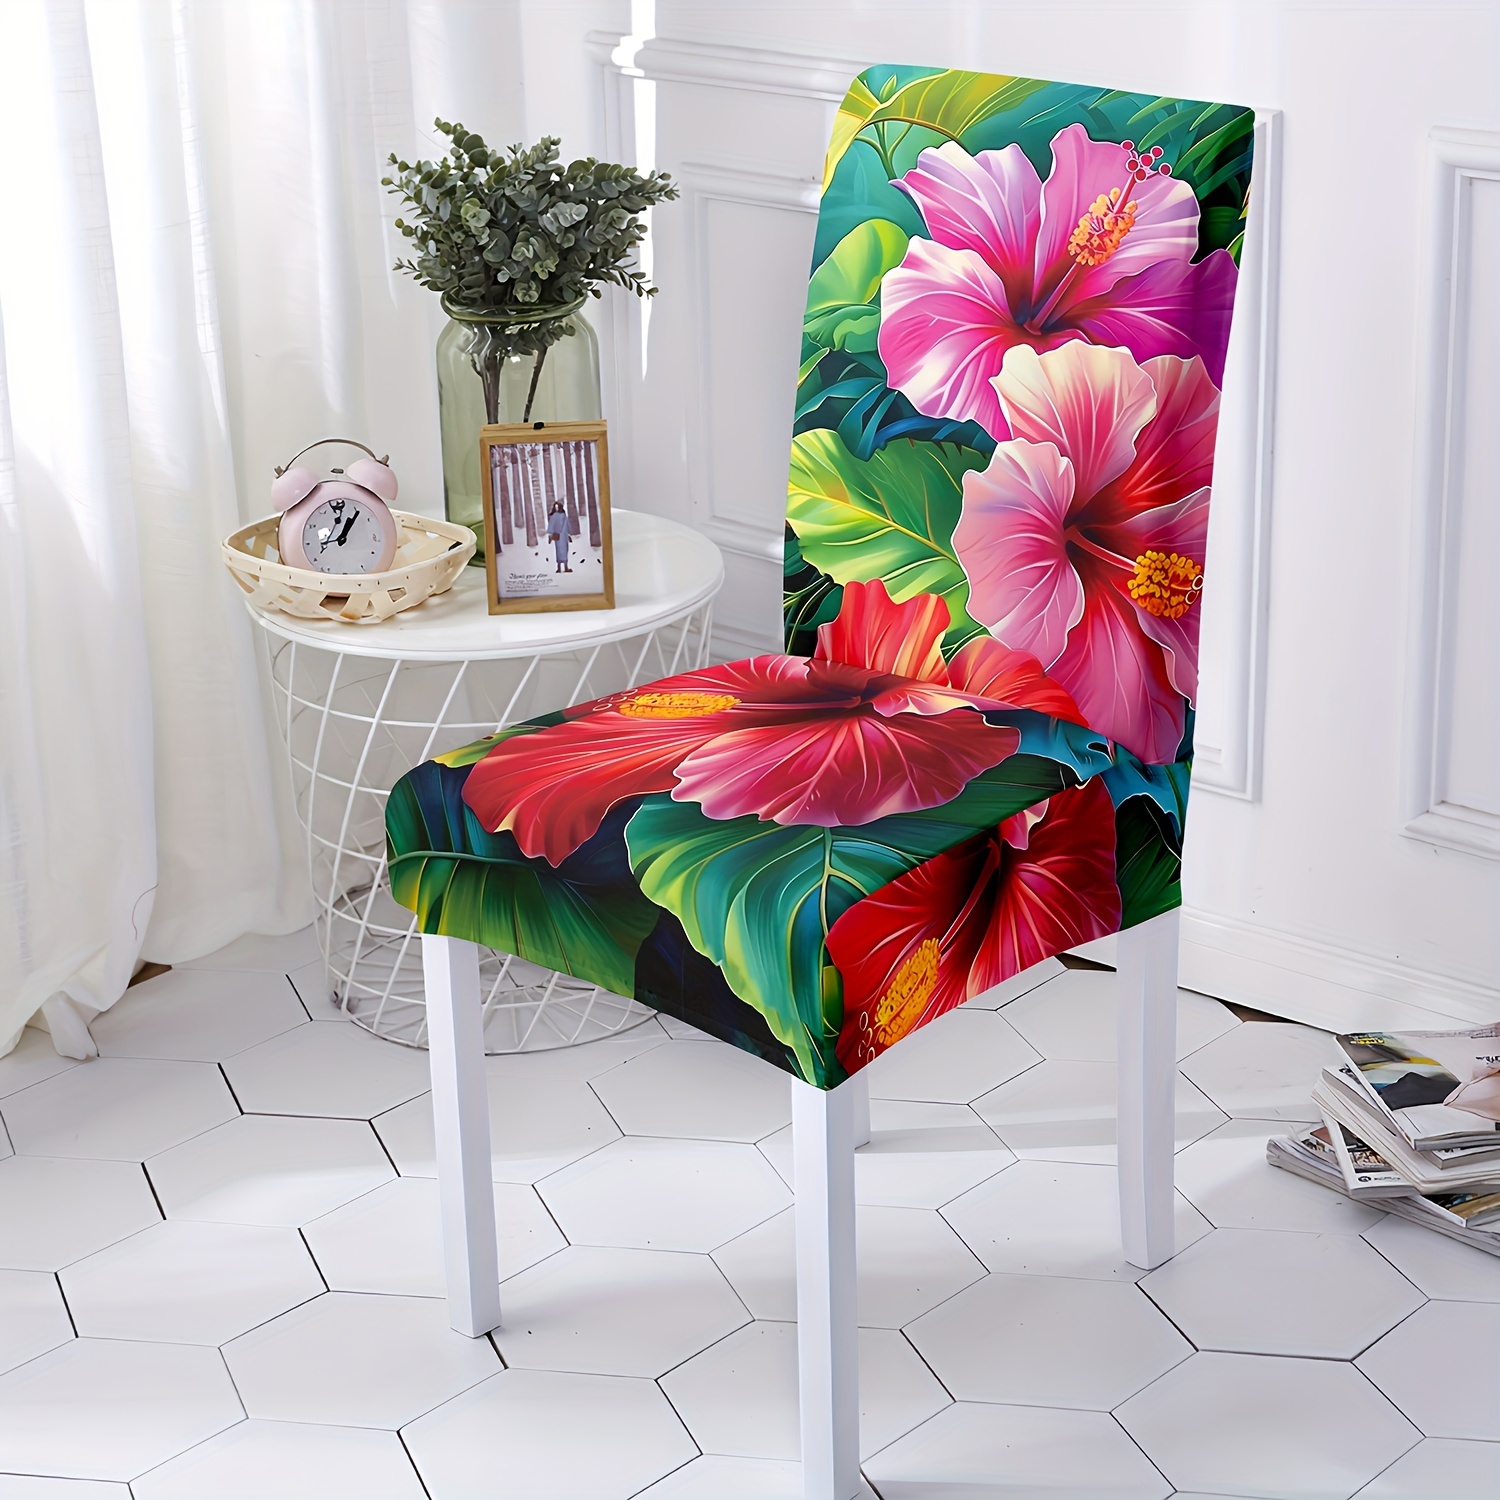 

Stretchable Red Floral & Green Leaf Print Chair Cover - Removable, Washable Dining Room Slipcover For Restaurants, Hotels, Ceremonies & Festive Decor